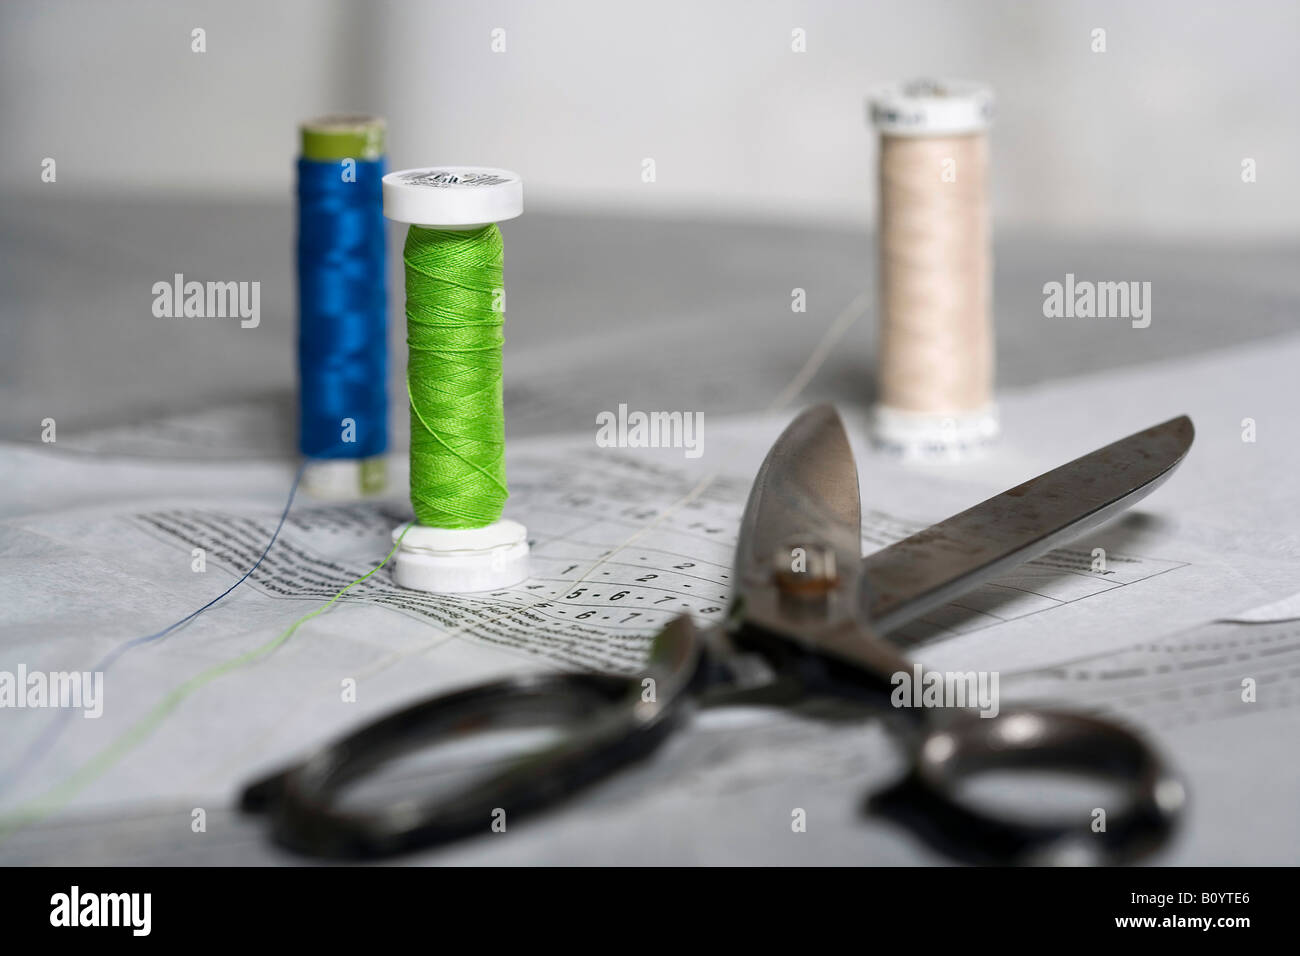 Sewing items Stock Photo